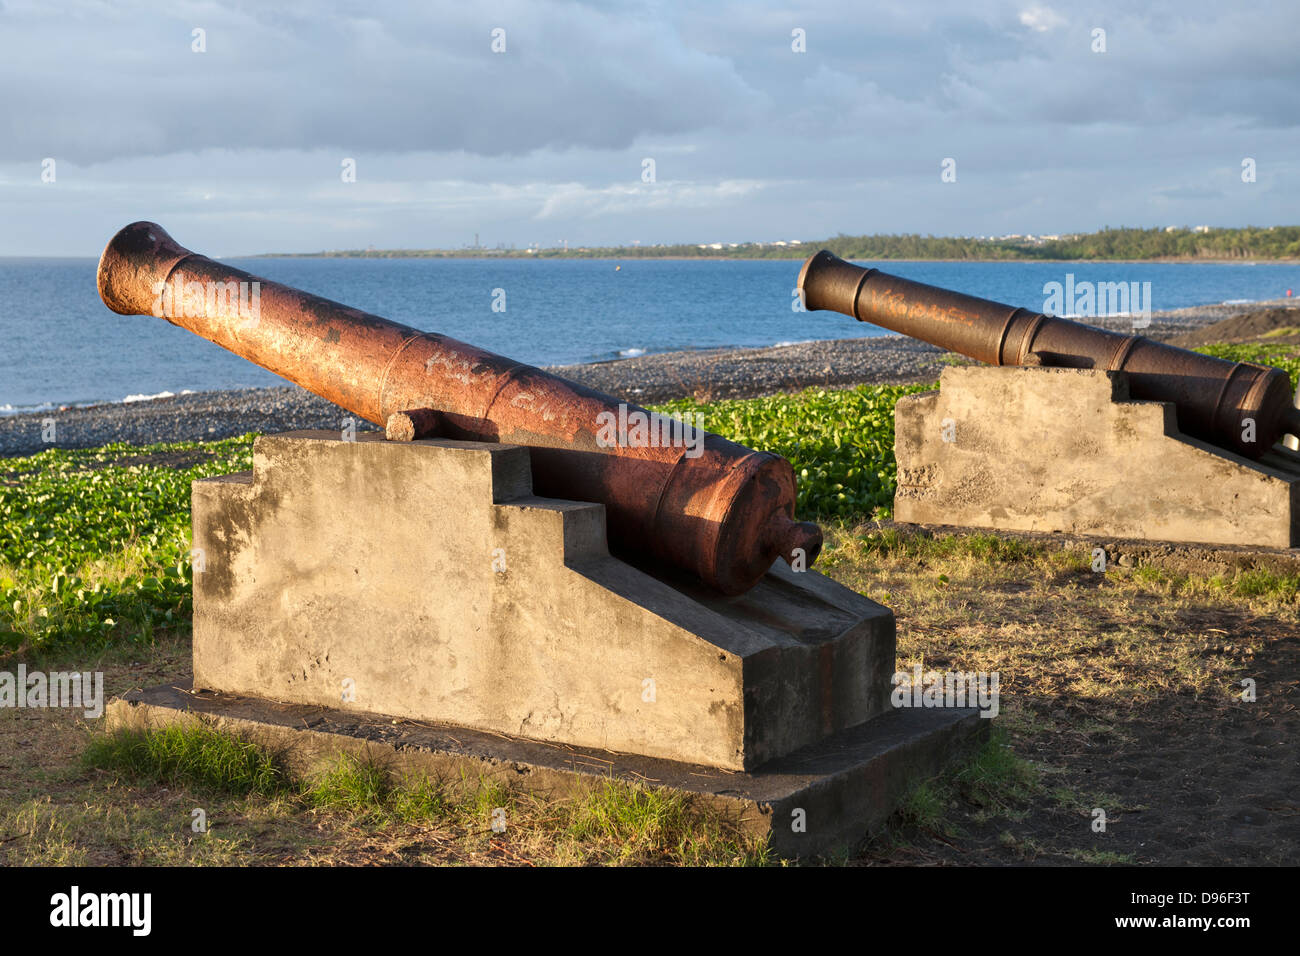 Historic cannons at the village of St Paul on the French island of Reunion in the Indian Ocean. Stock Photo